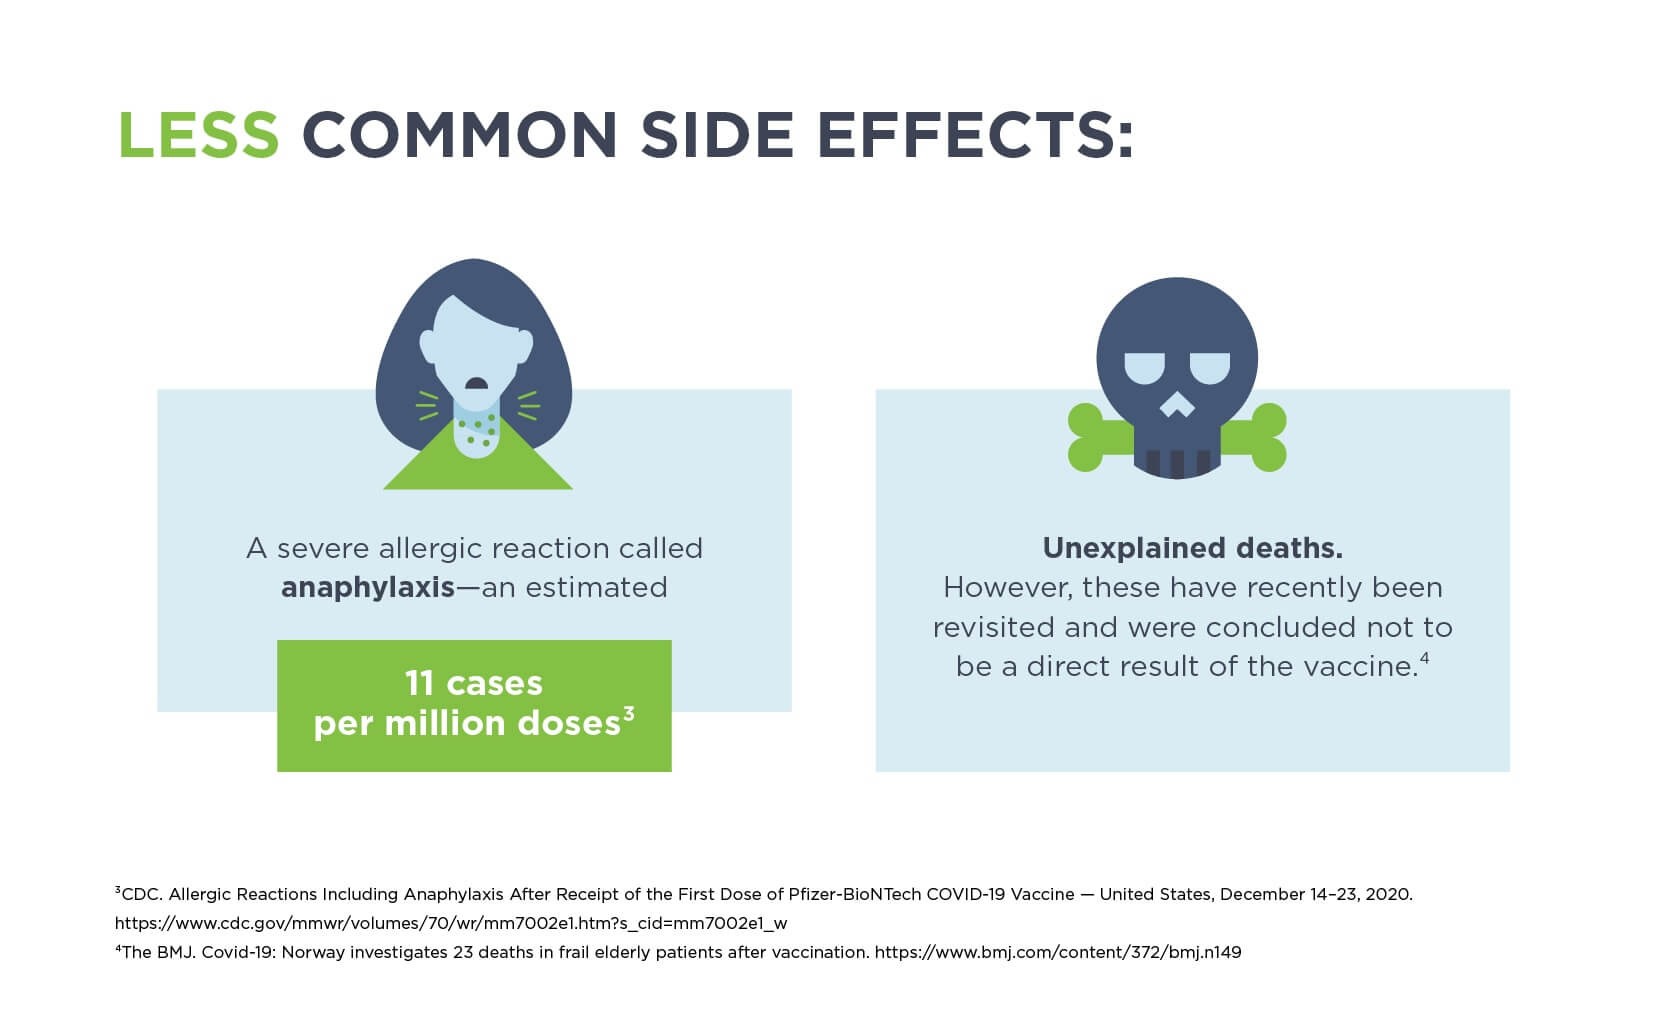 Illustrations shows less common side effects of the covid vaccine.